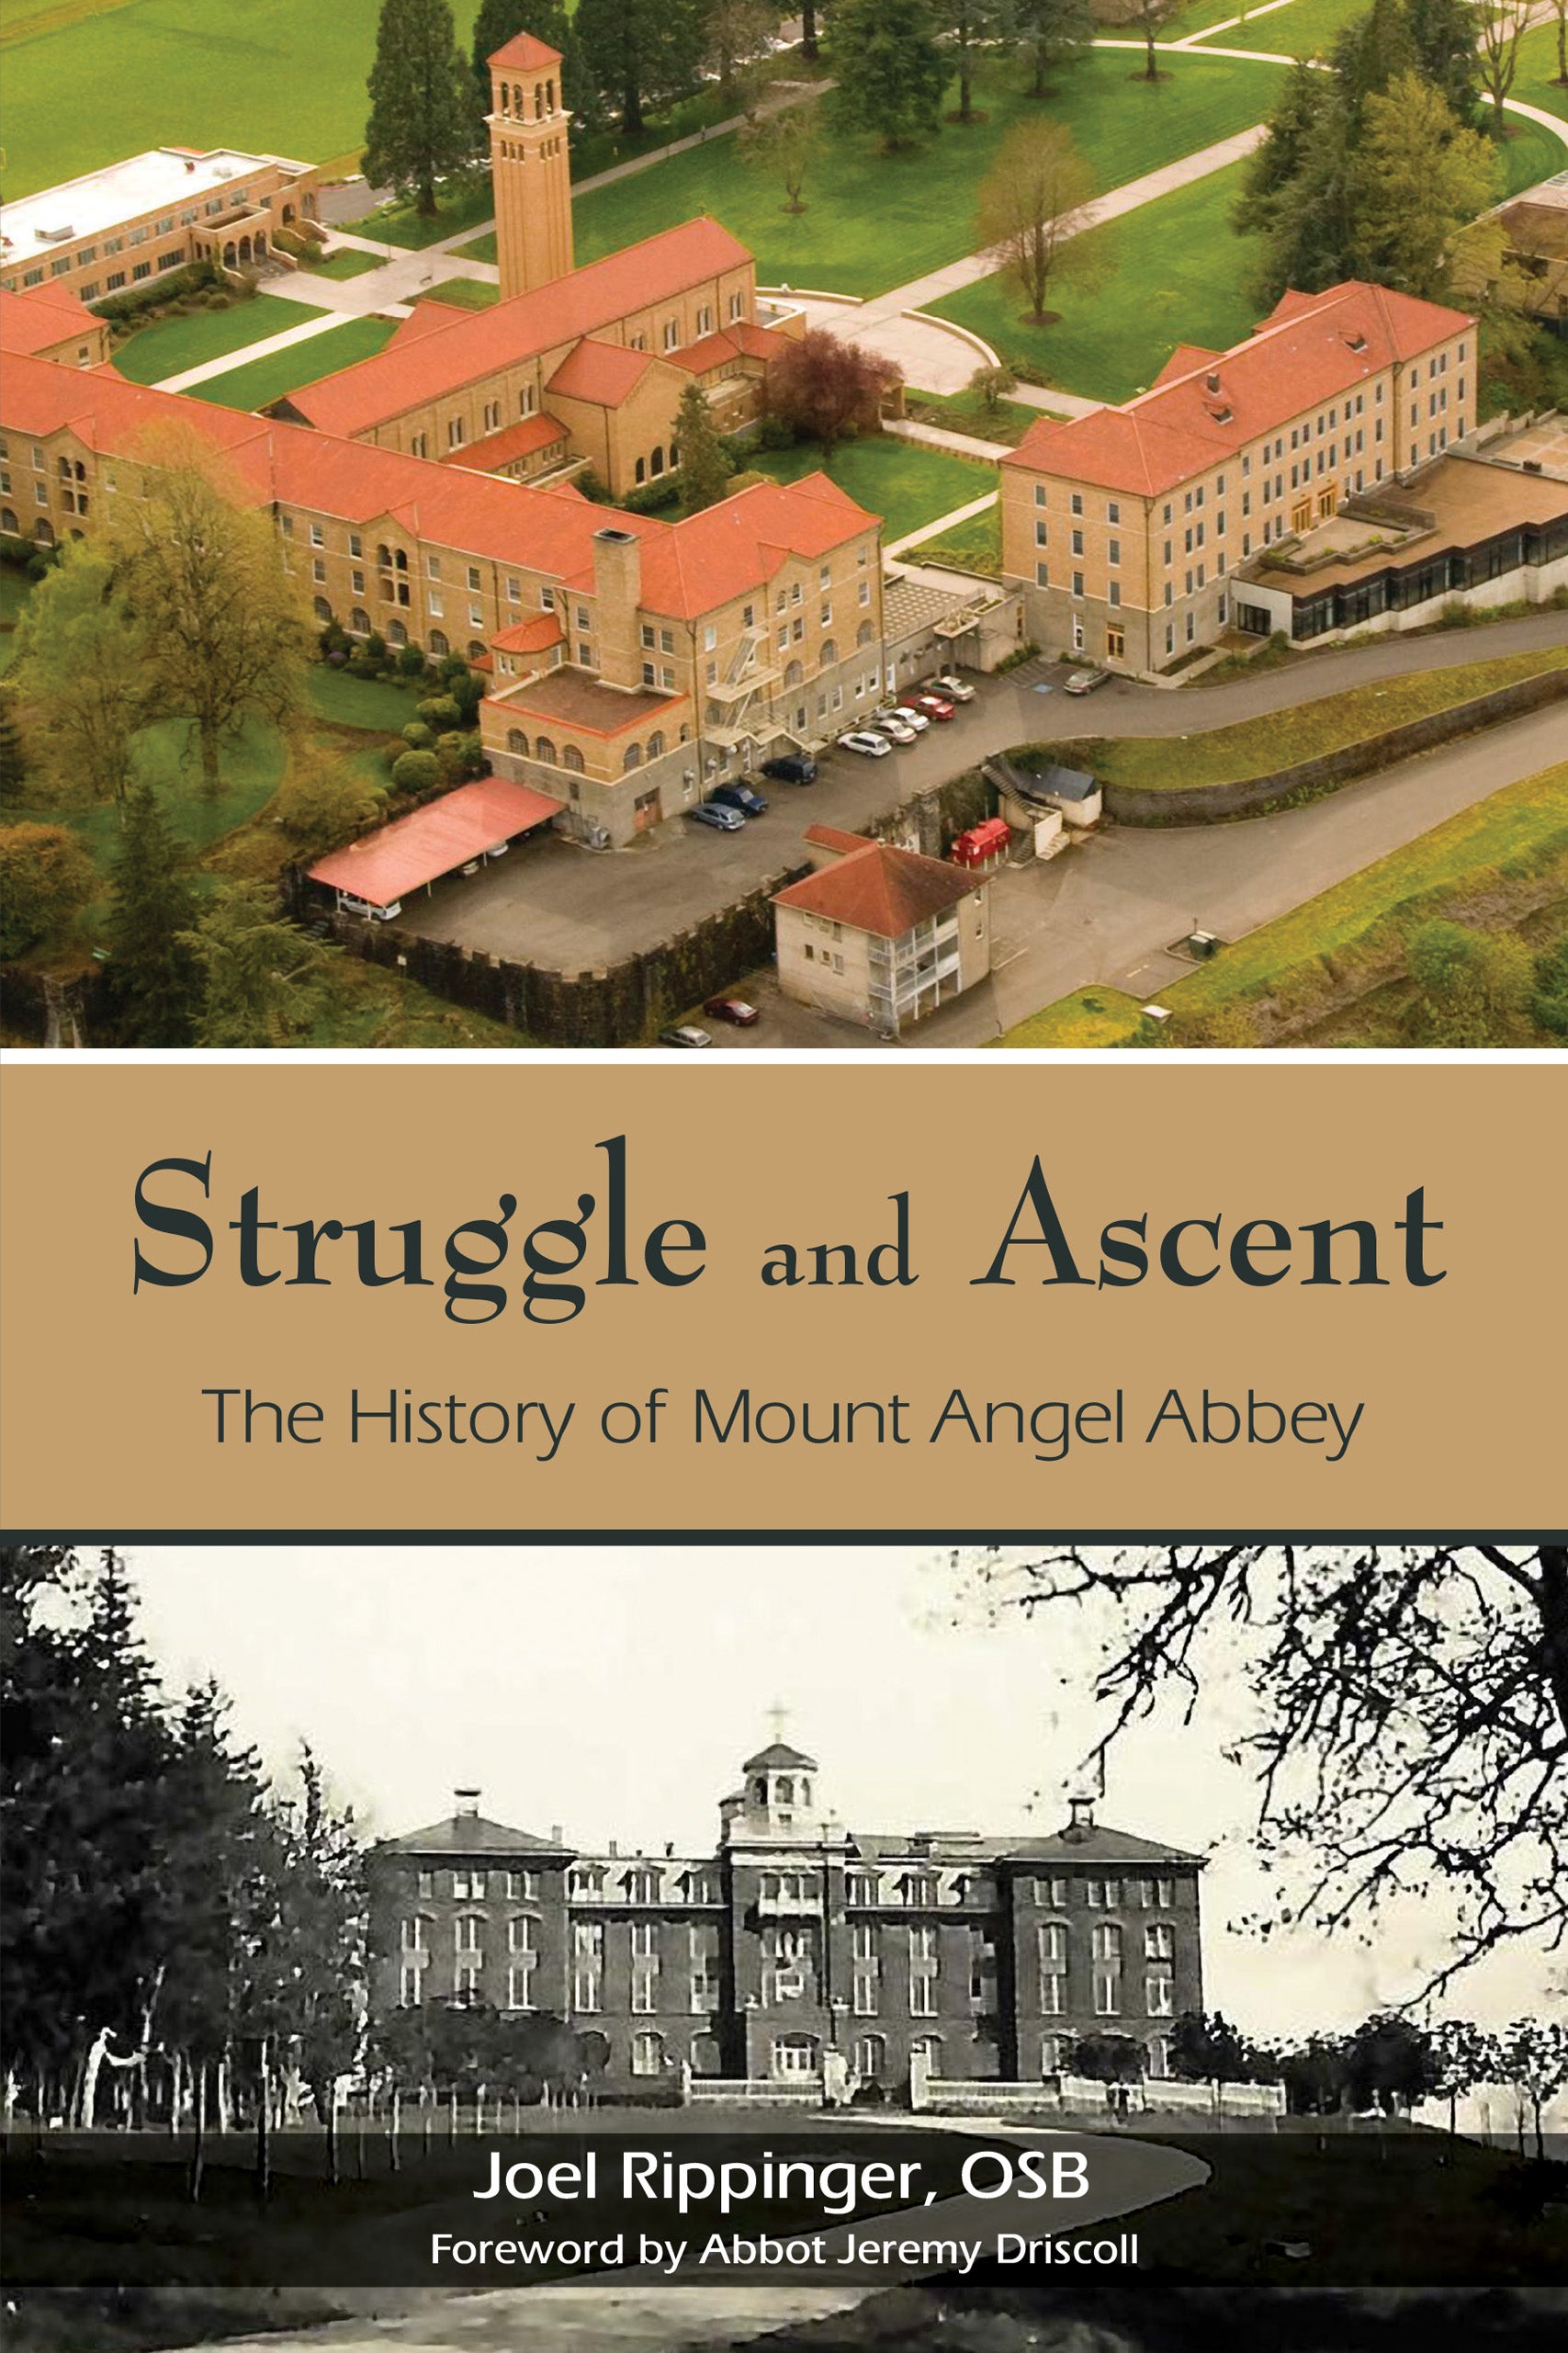 Struggle and Ascent by Joel Rippinger, O.S.B and introduction by Abbot Jeremy Driscoll, O.S.B.